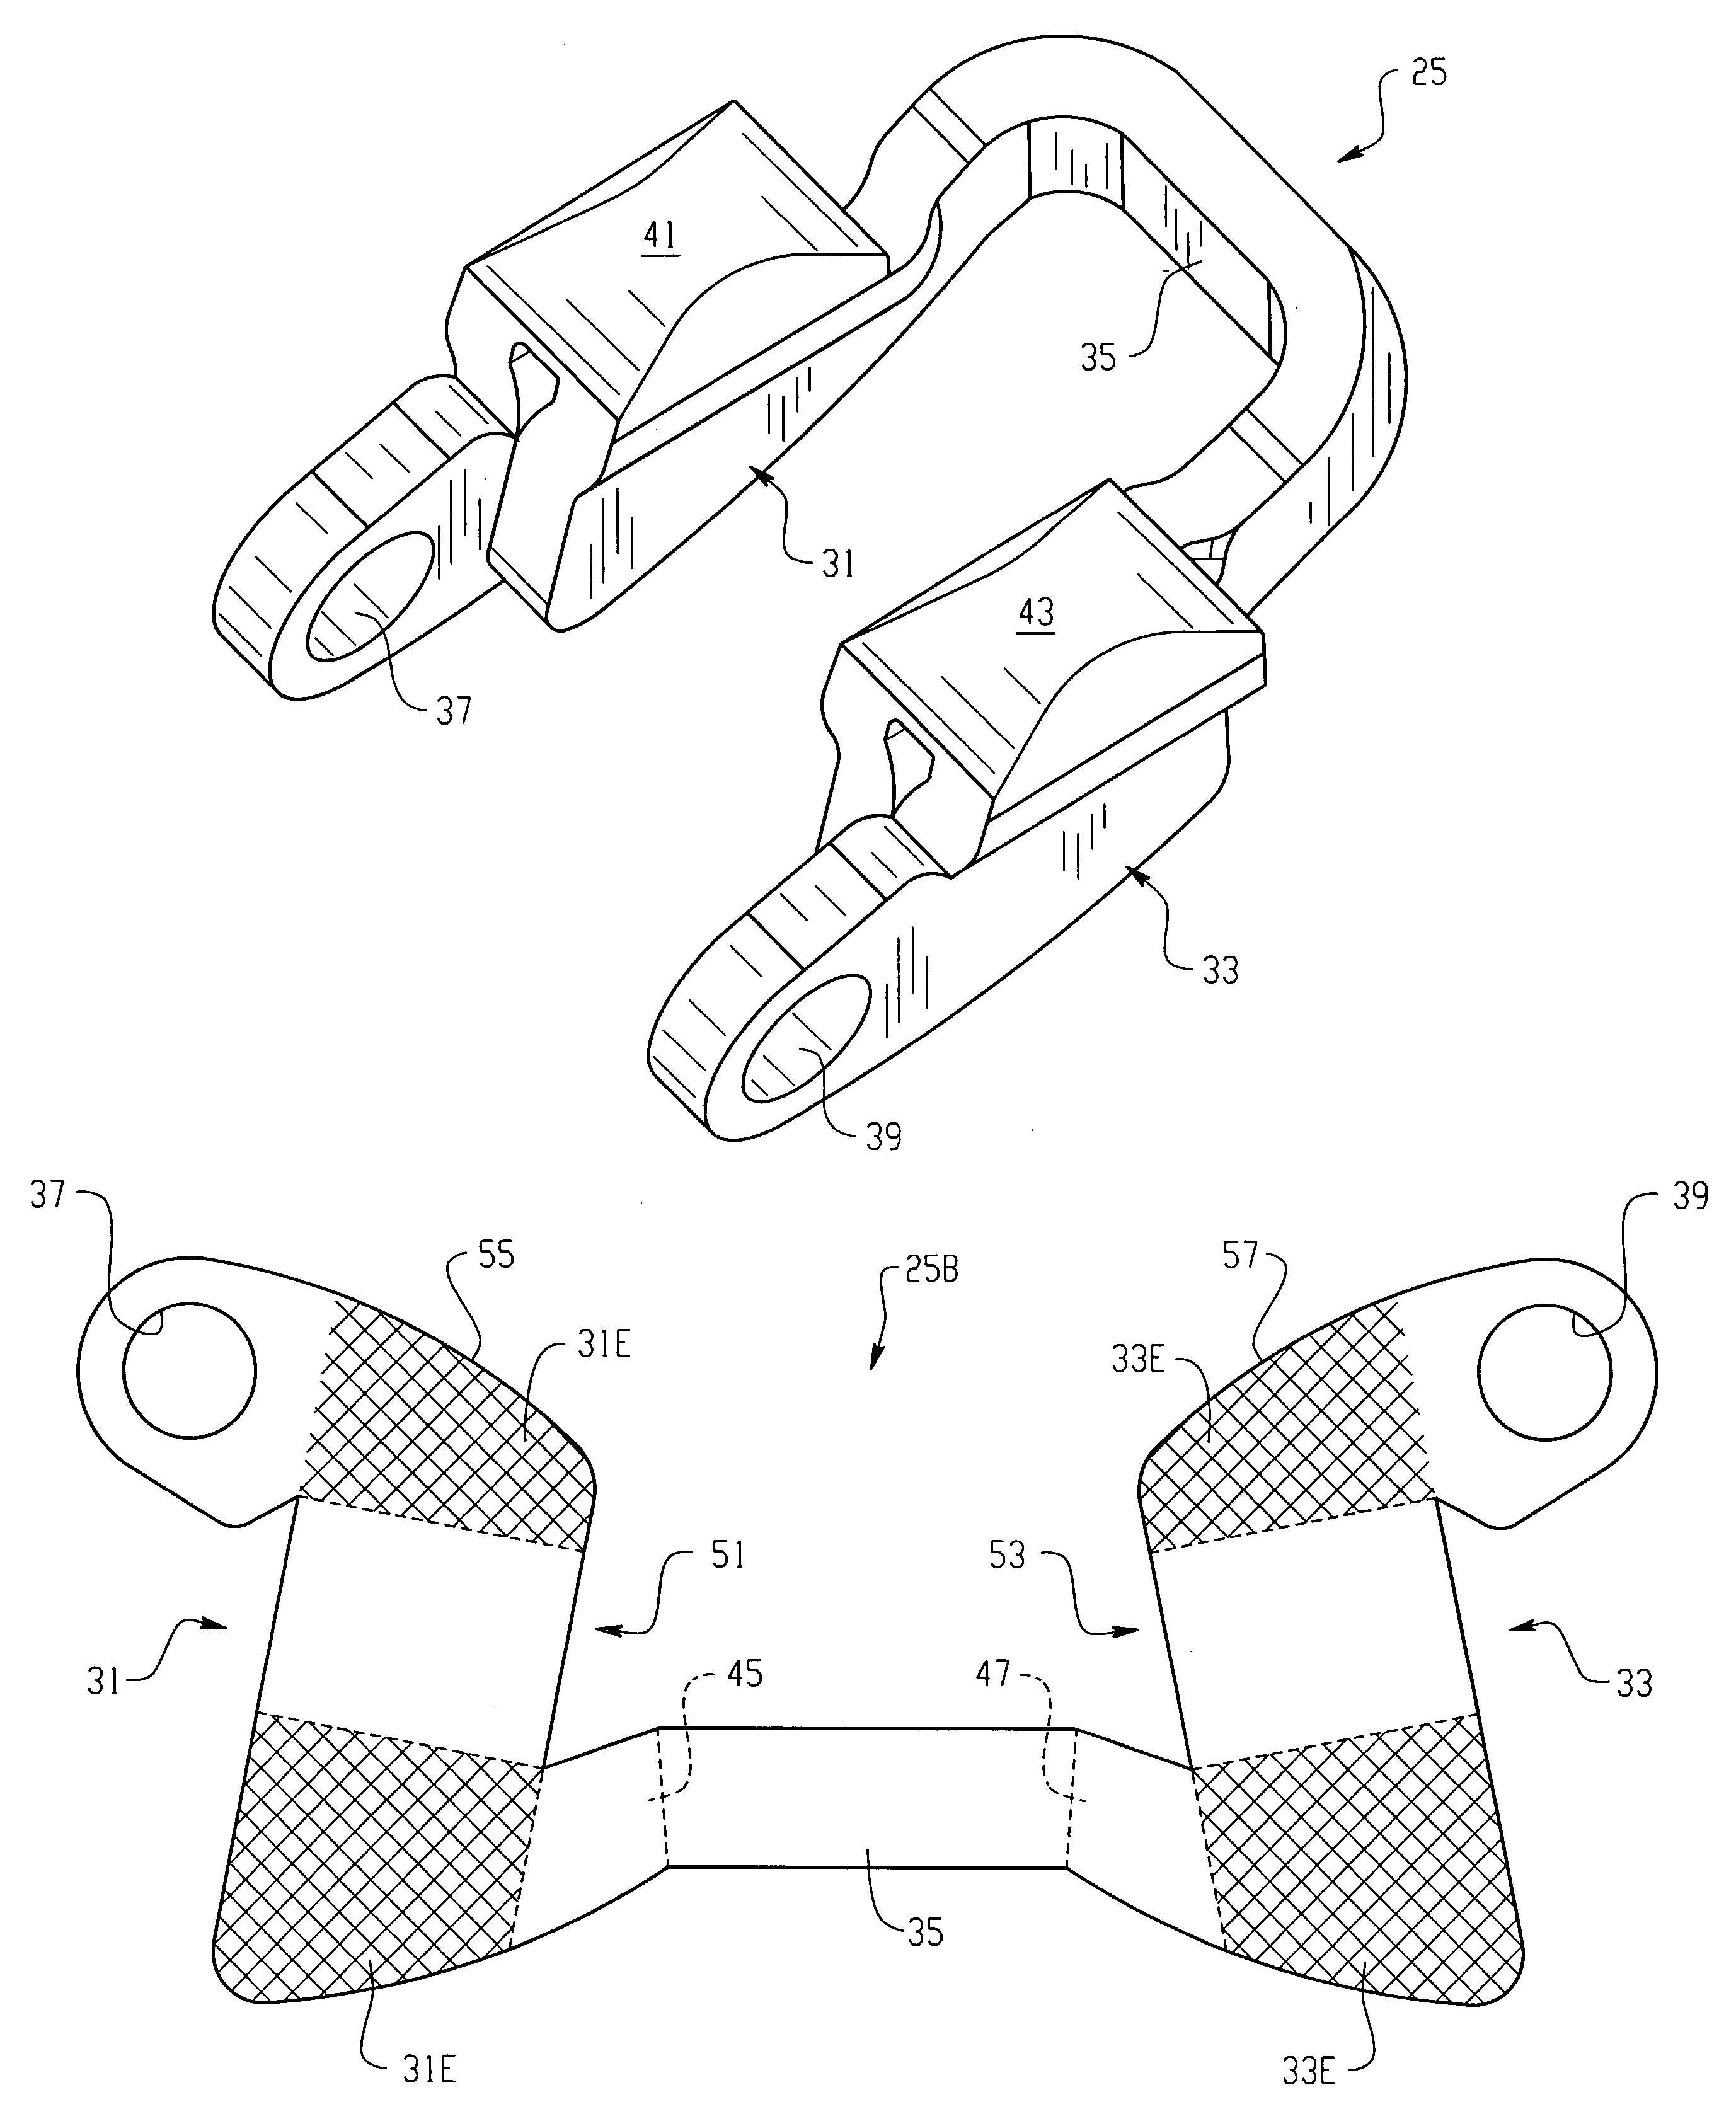 Stamped two-step rocker arm component